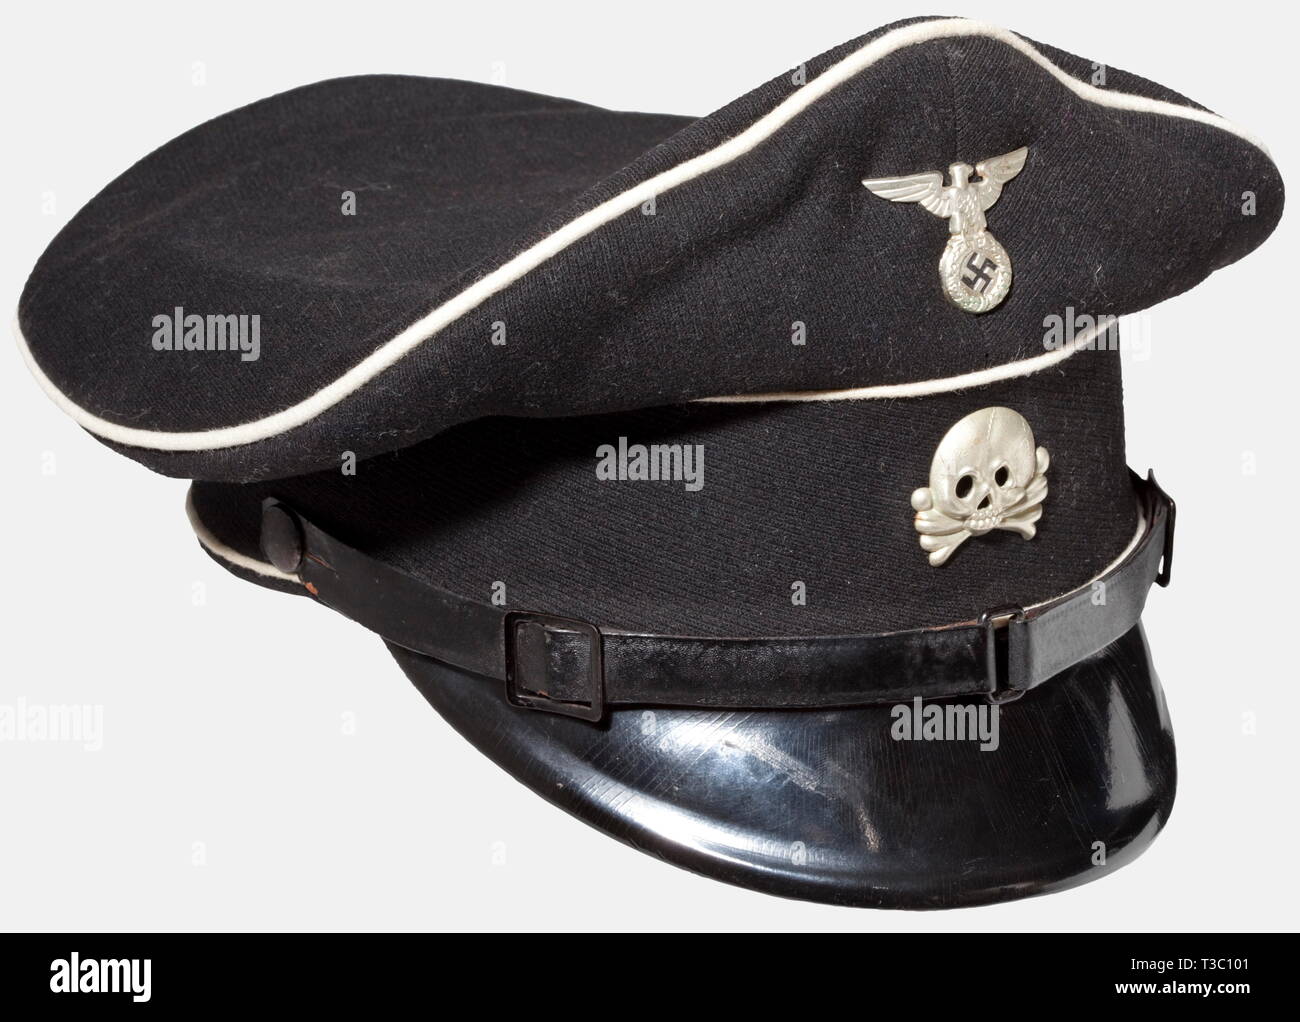 A visor cap for SS enlisted men/NCOs, early model Cap body of black woolen material with white piping and silver-plated metal insignia in the early form, three-piece patent leather chinstrap. Inner liner of brown cotton and oil cloth. Leather sweatband. Size 56. Ordinarily, these early pieces did not carry SS or RZM markings. historic, historical, 1930s, 1930s, 20th century, Waffen-SS, armed division of the SS, armed service, armed services, NS, National Socialism, Nazism, Third Reich, German Reich, Germany, military, militaria, utensil, piece of equipment, utensils, object, Editorial-Use-Only Stock Photo